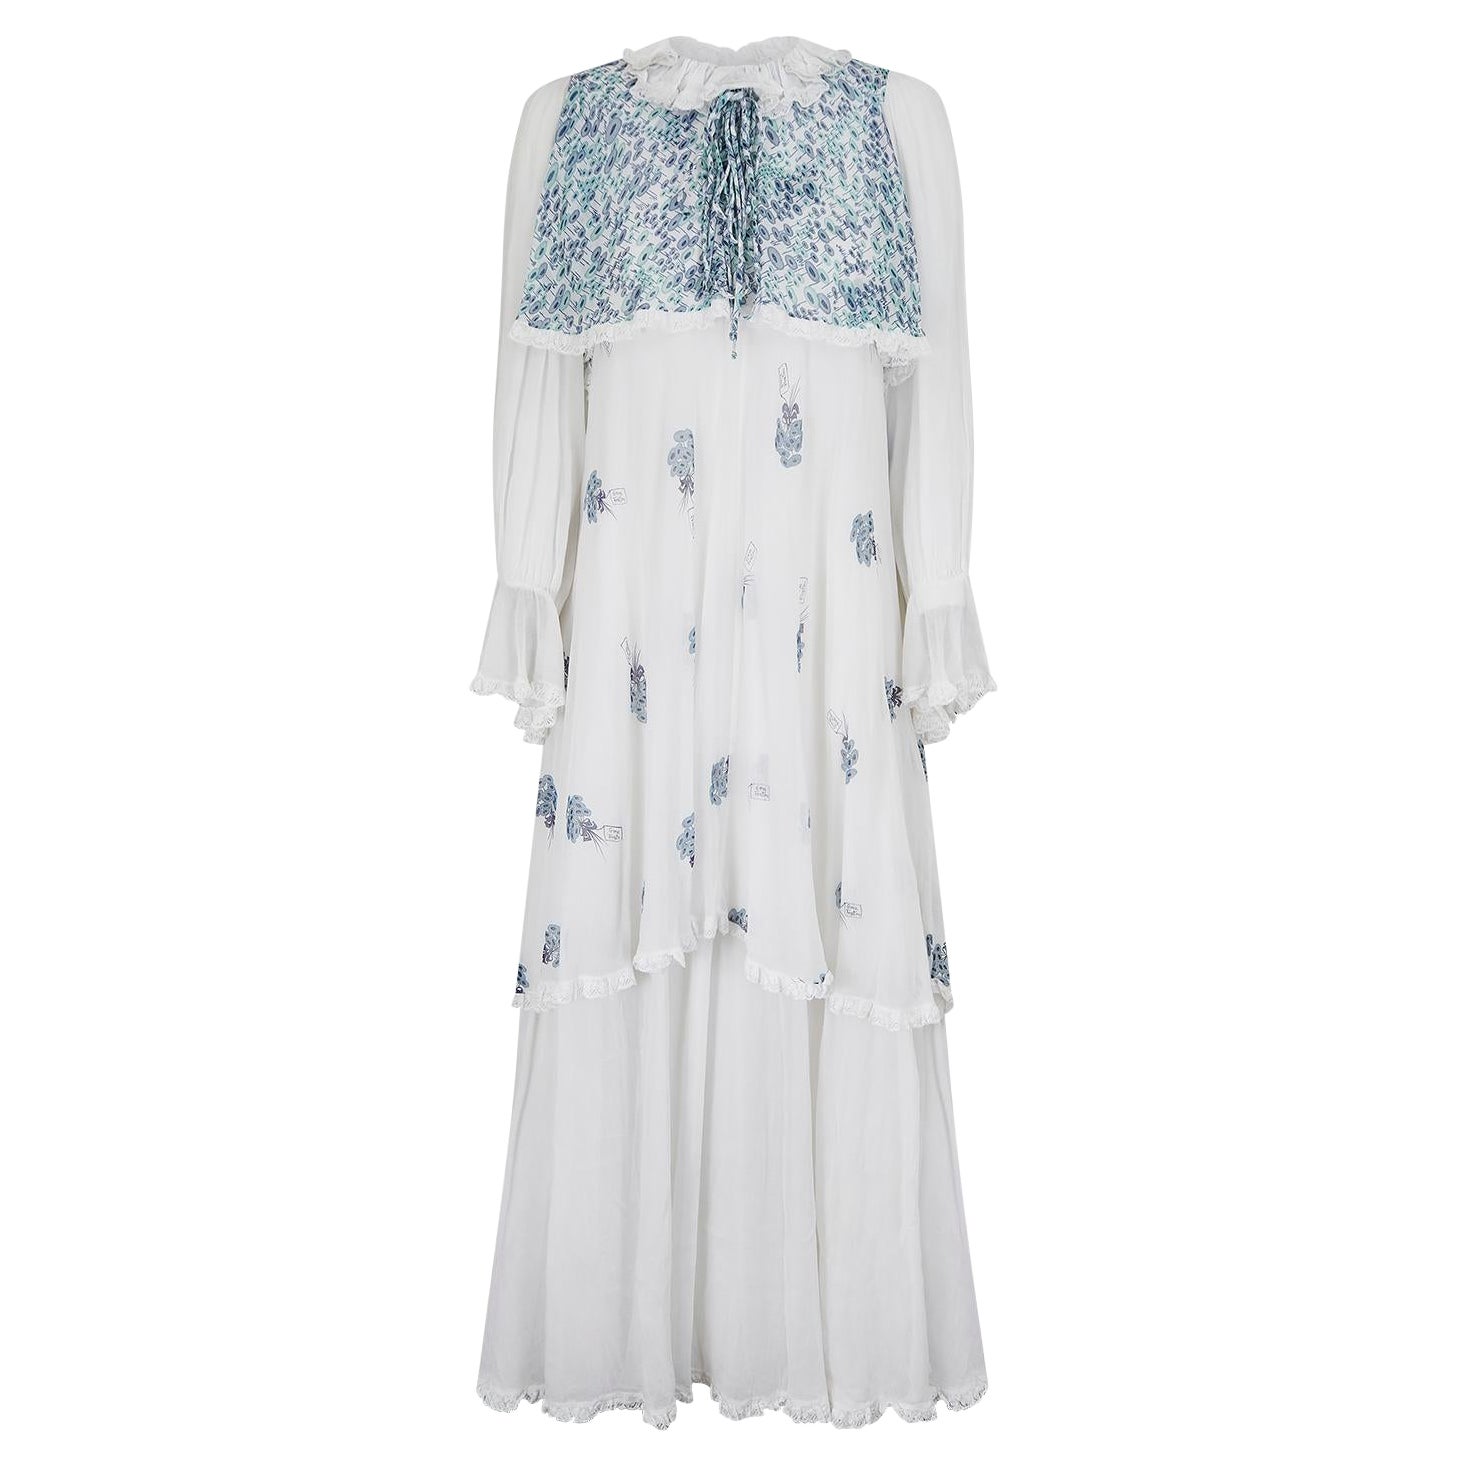 1970s Gina Fratini White and Blue Floral Cotton Maxi Dress For Sale